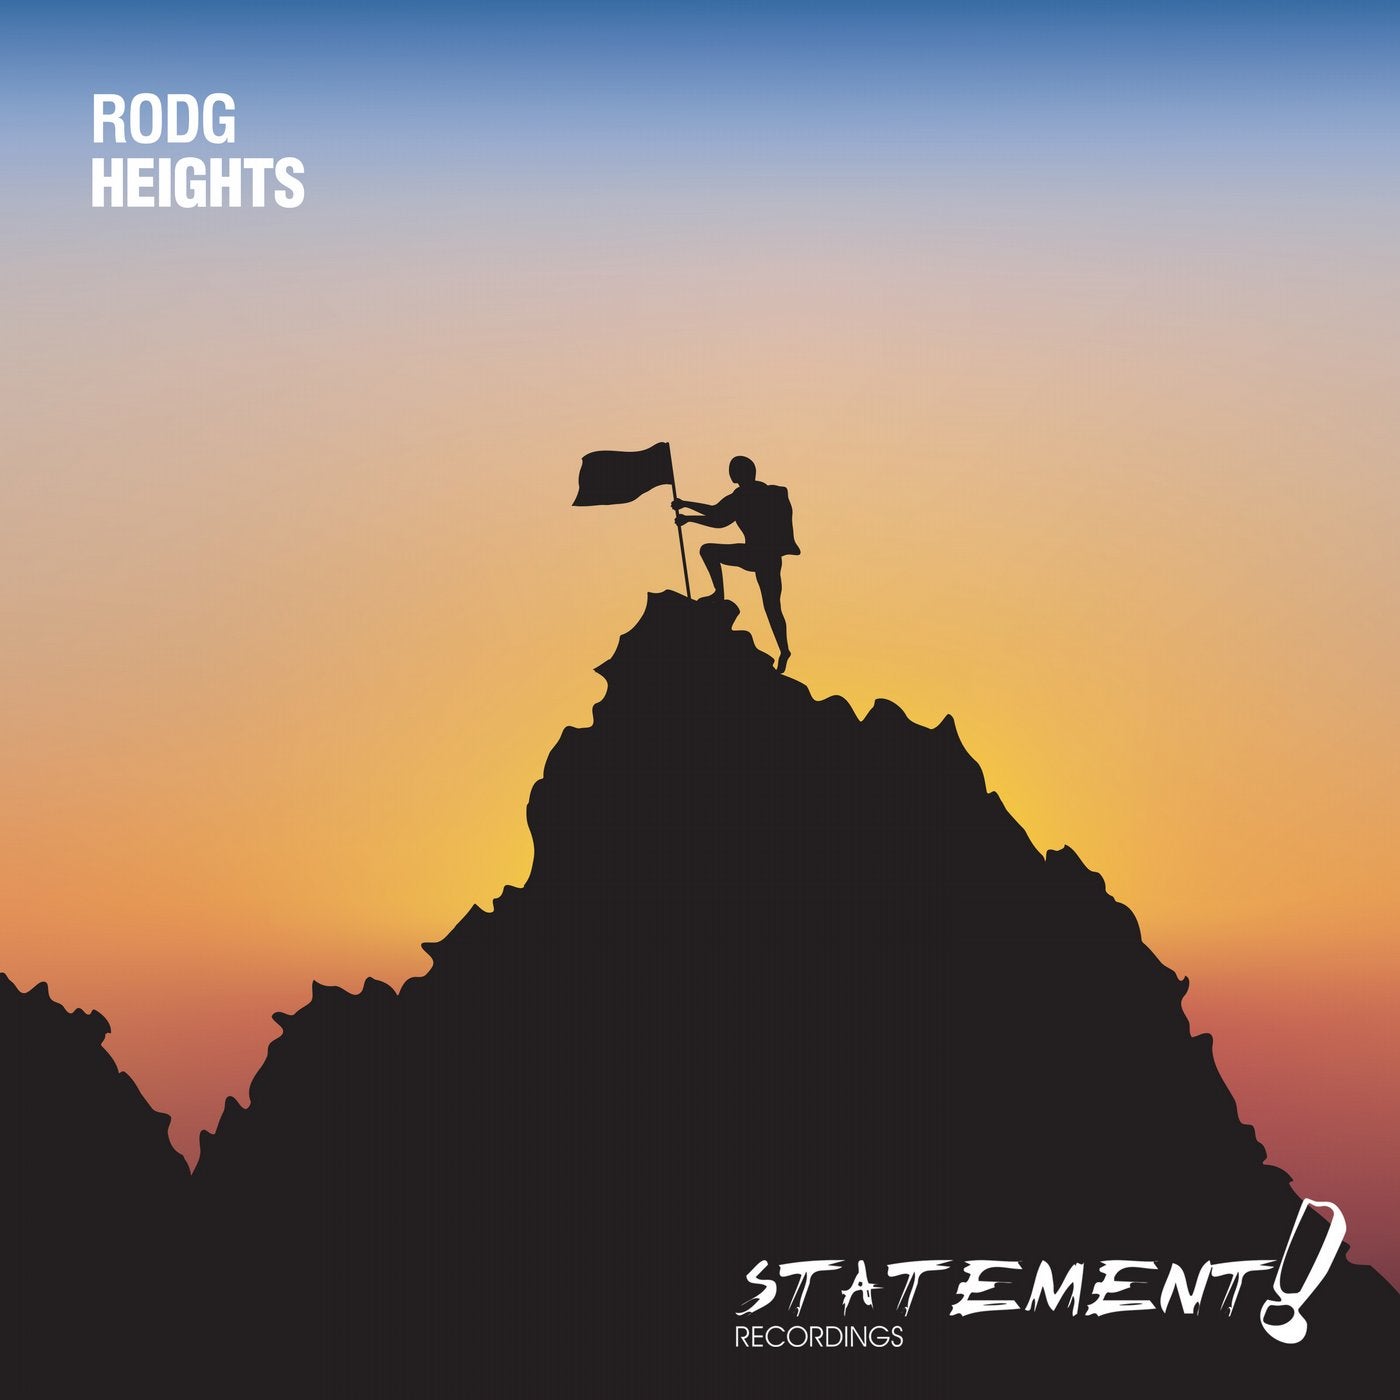 Height песни. Rodg. Rodg & Jardin - Mountain Space. Rodg01. Altitude Music a Song for the Soul.